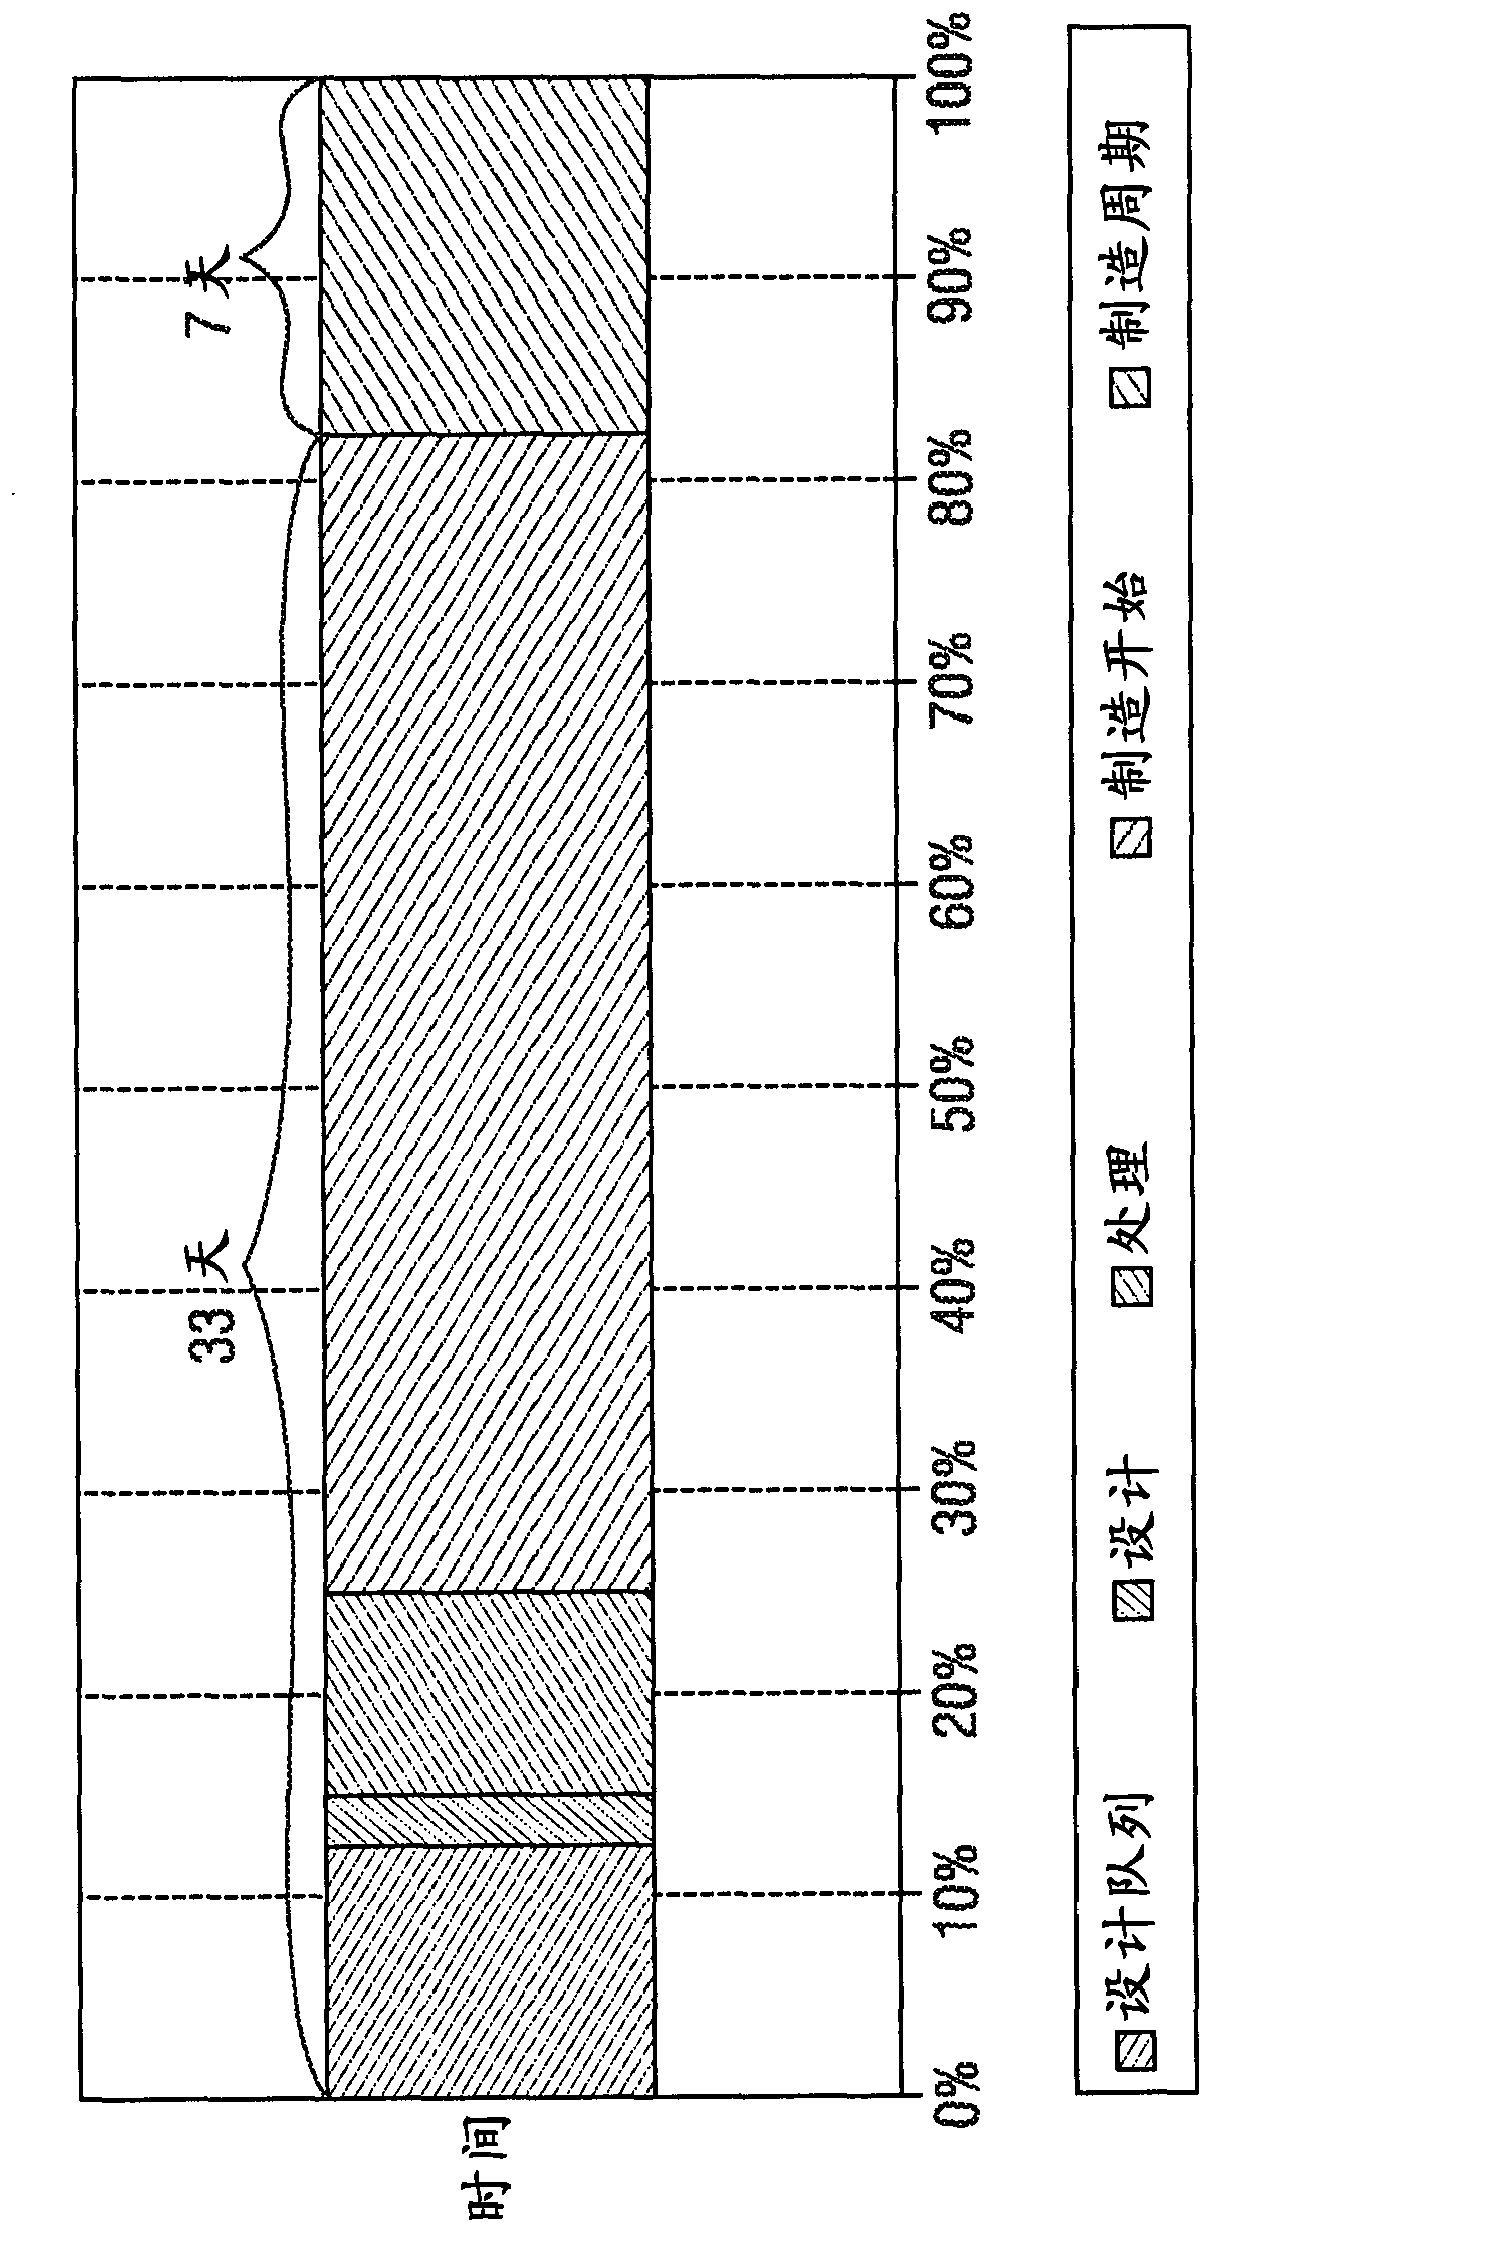 Method and apparatus for efficient implementation of design changes